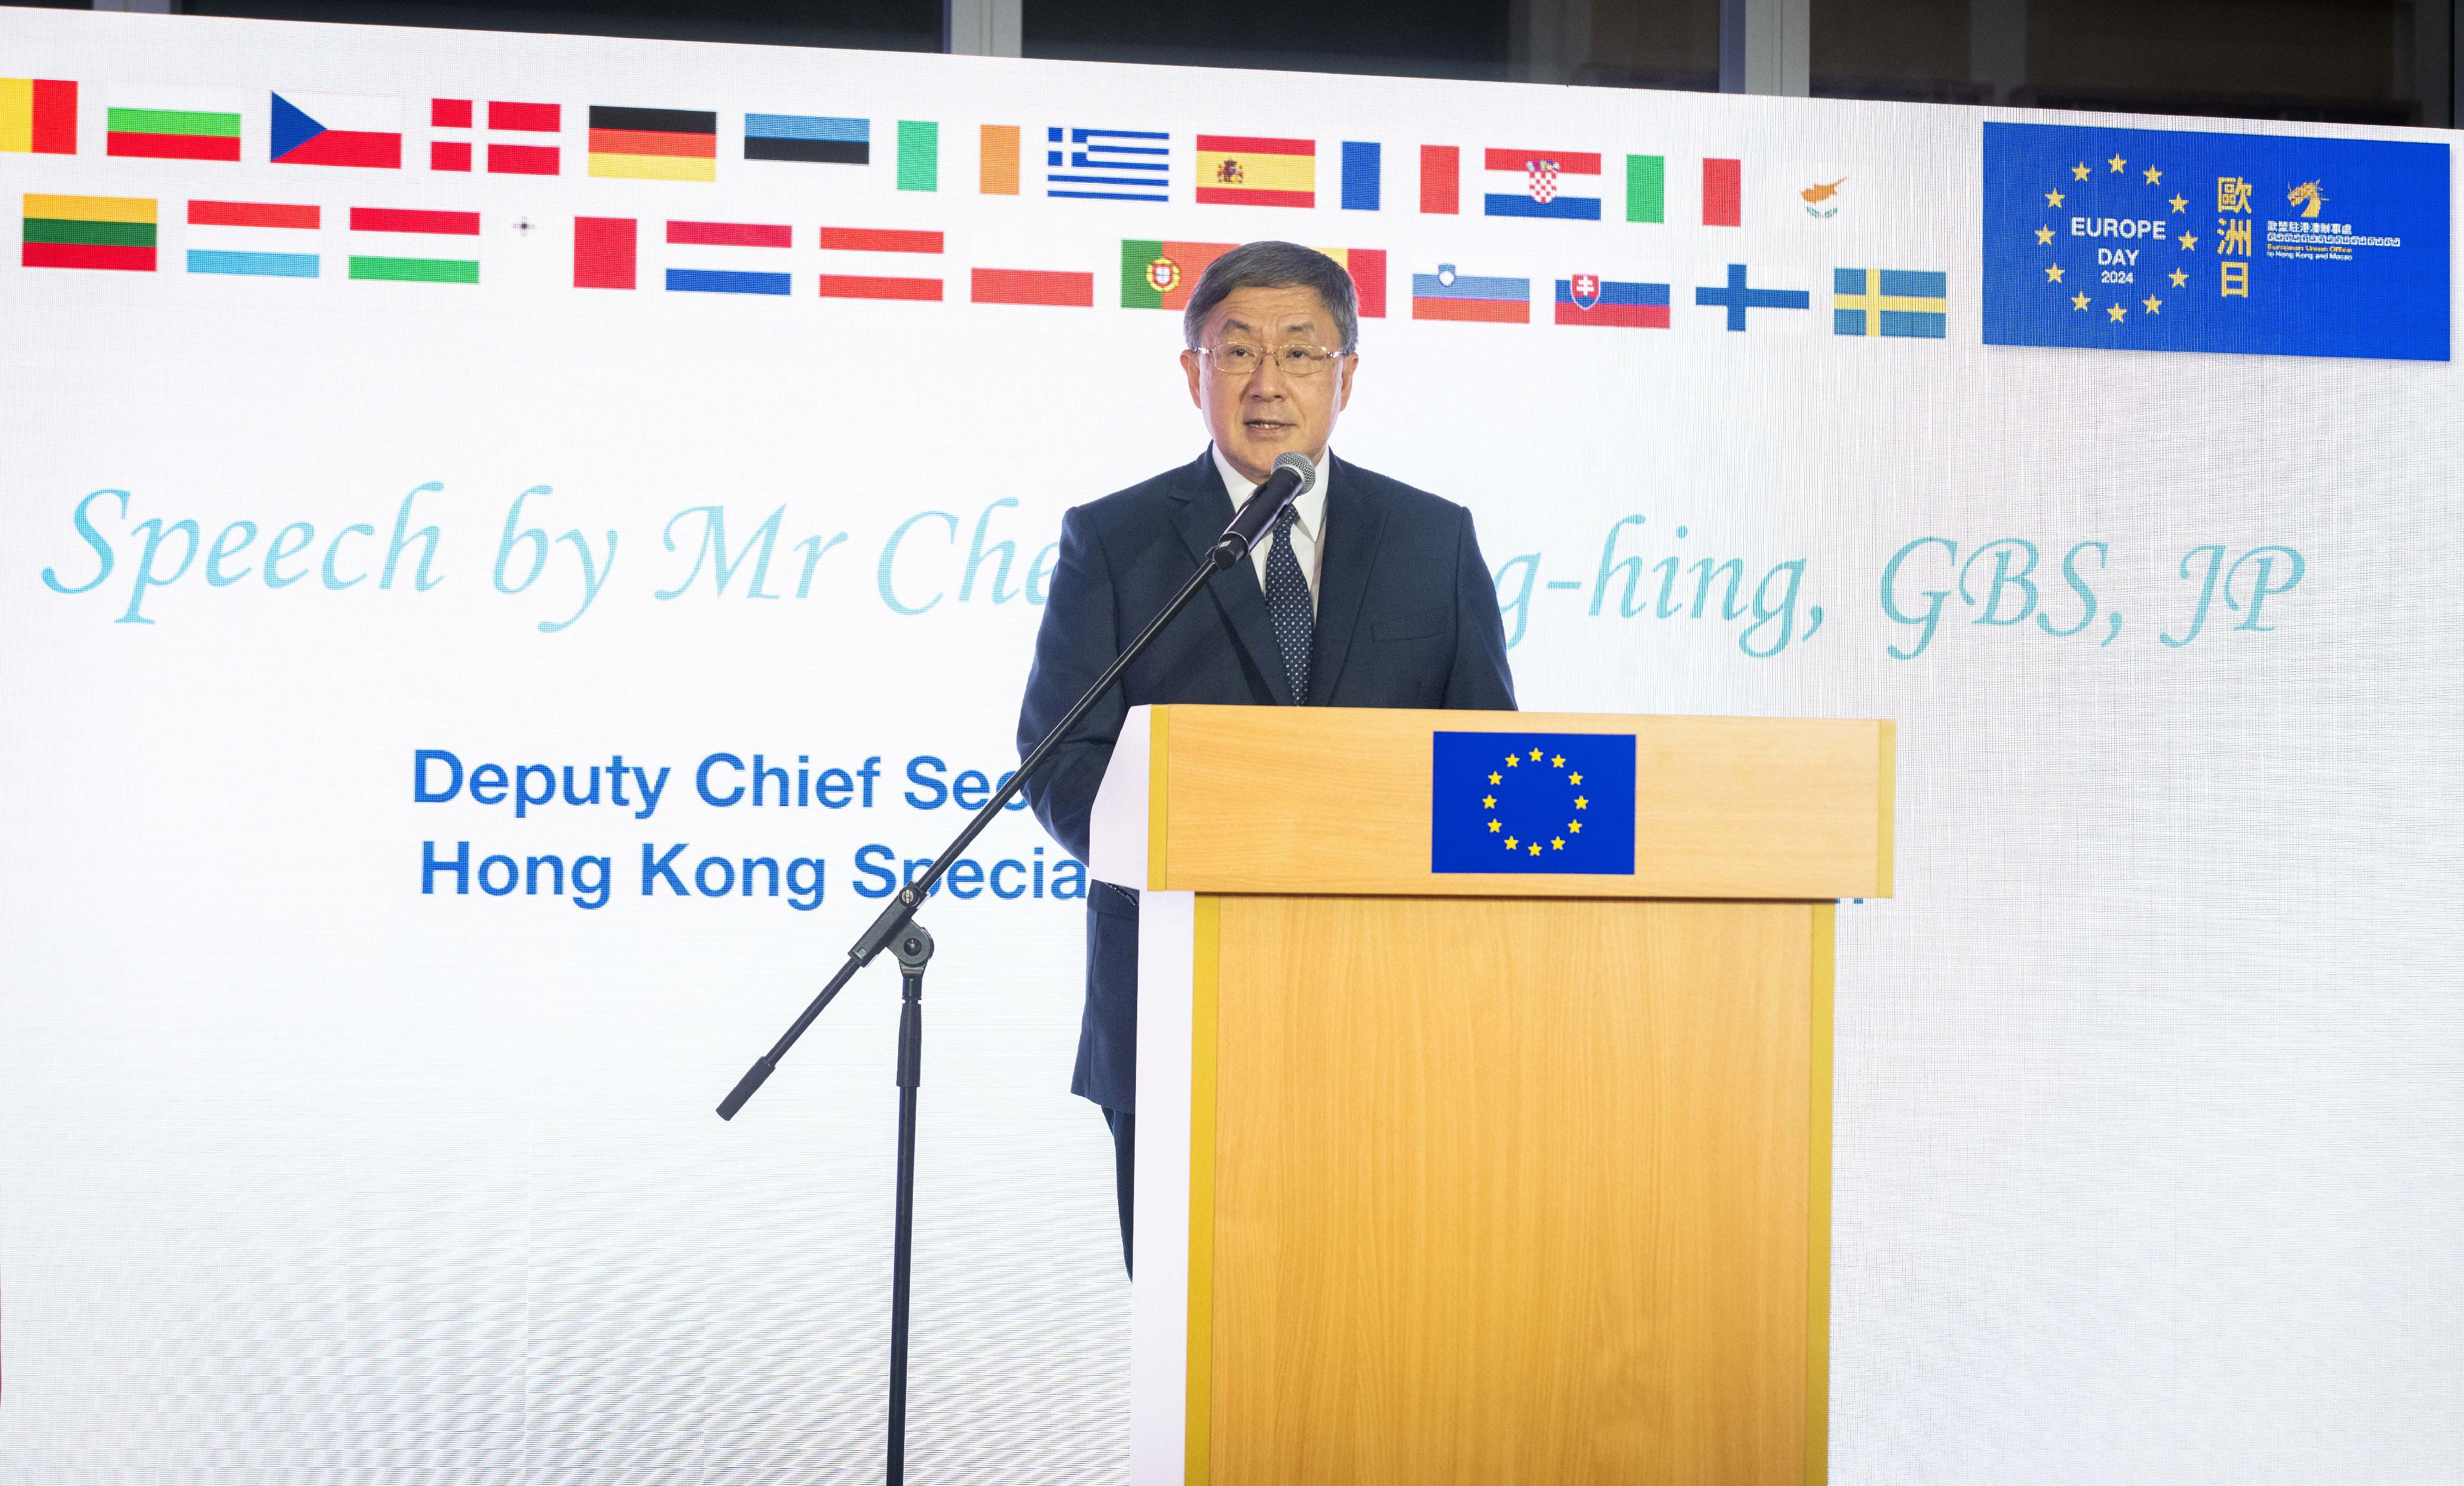 The Deputy Chief Secretary for Administration, Mr Cheuk Wing-hing, speaks at the Europe Day Reception this evening (May 9).